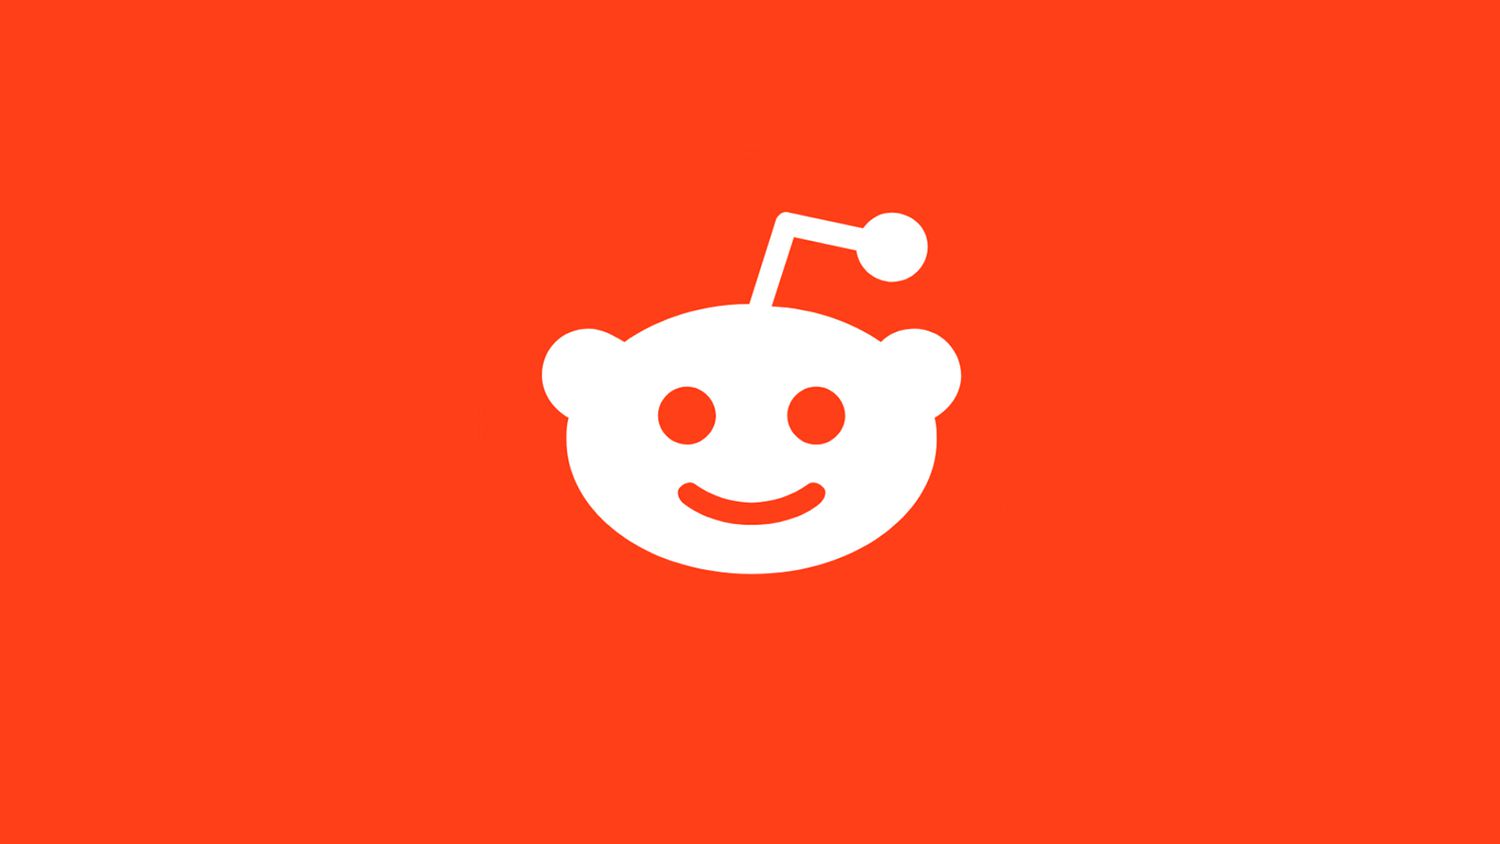 Reddit Files For IPO: What You Need To Know